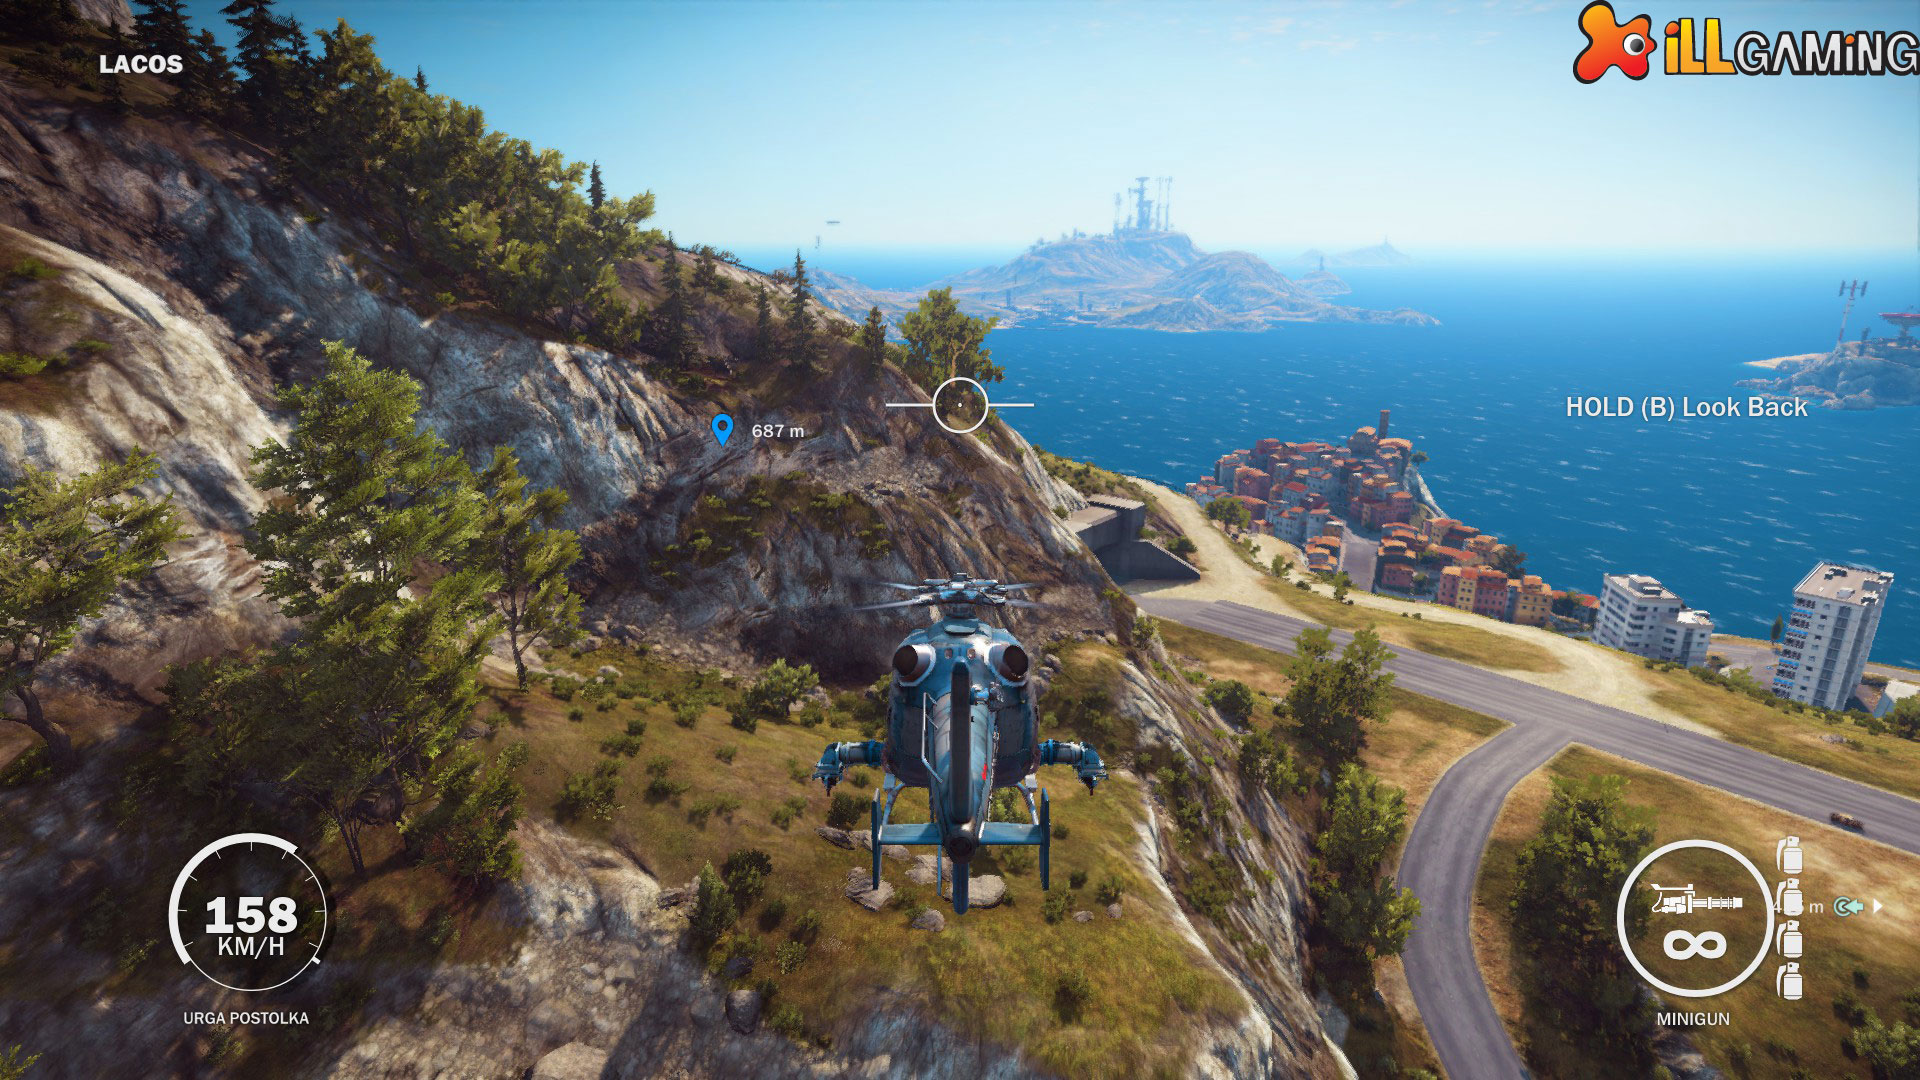 where does just cause 3 take place